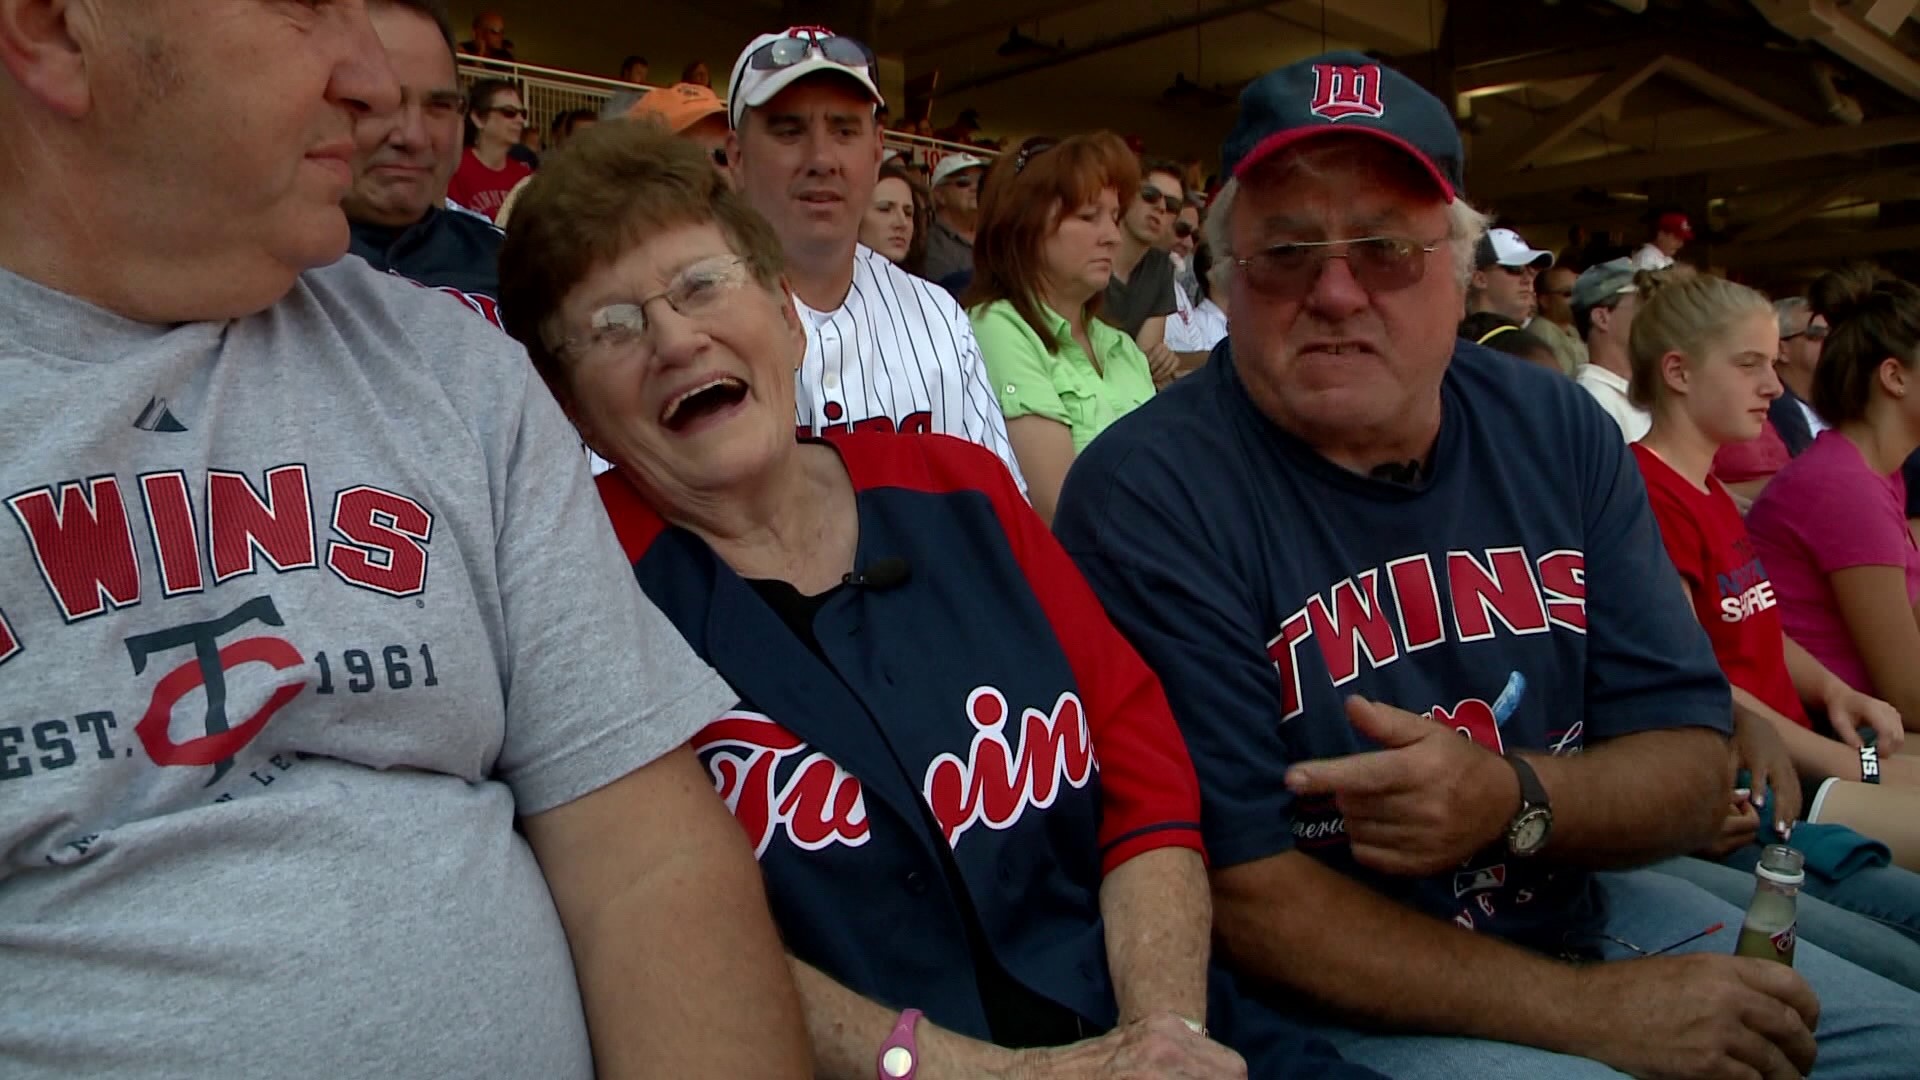 Rita Stoks watched the Twins' playoff run intently from her senior home in Canby, Minnesota.